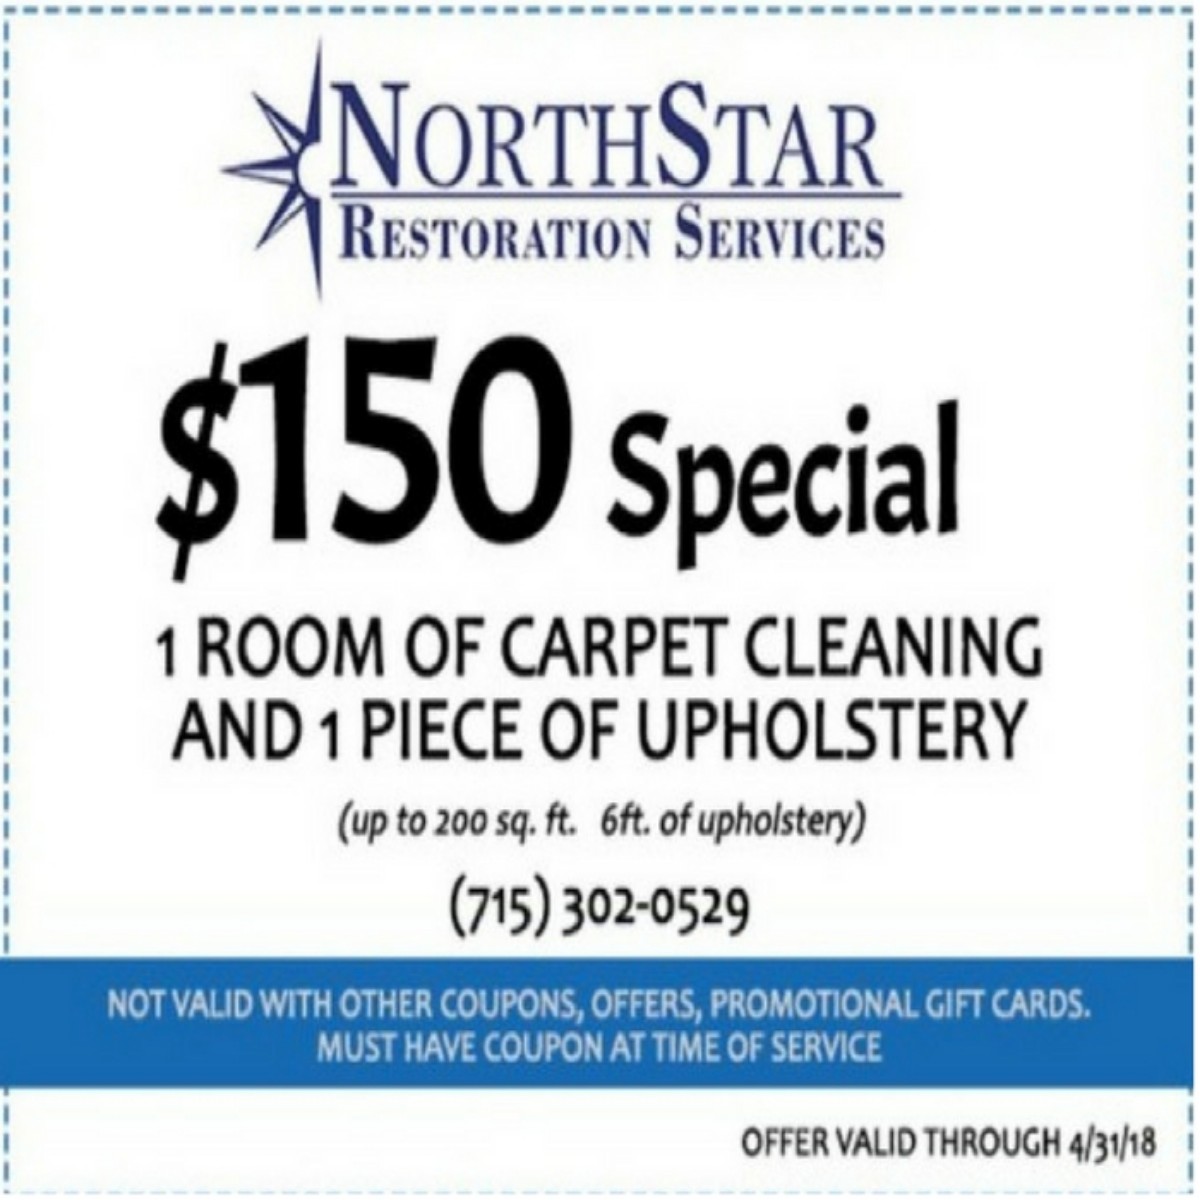   Home Services Coupons in Wausau Area